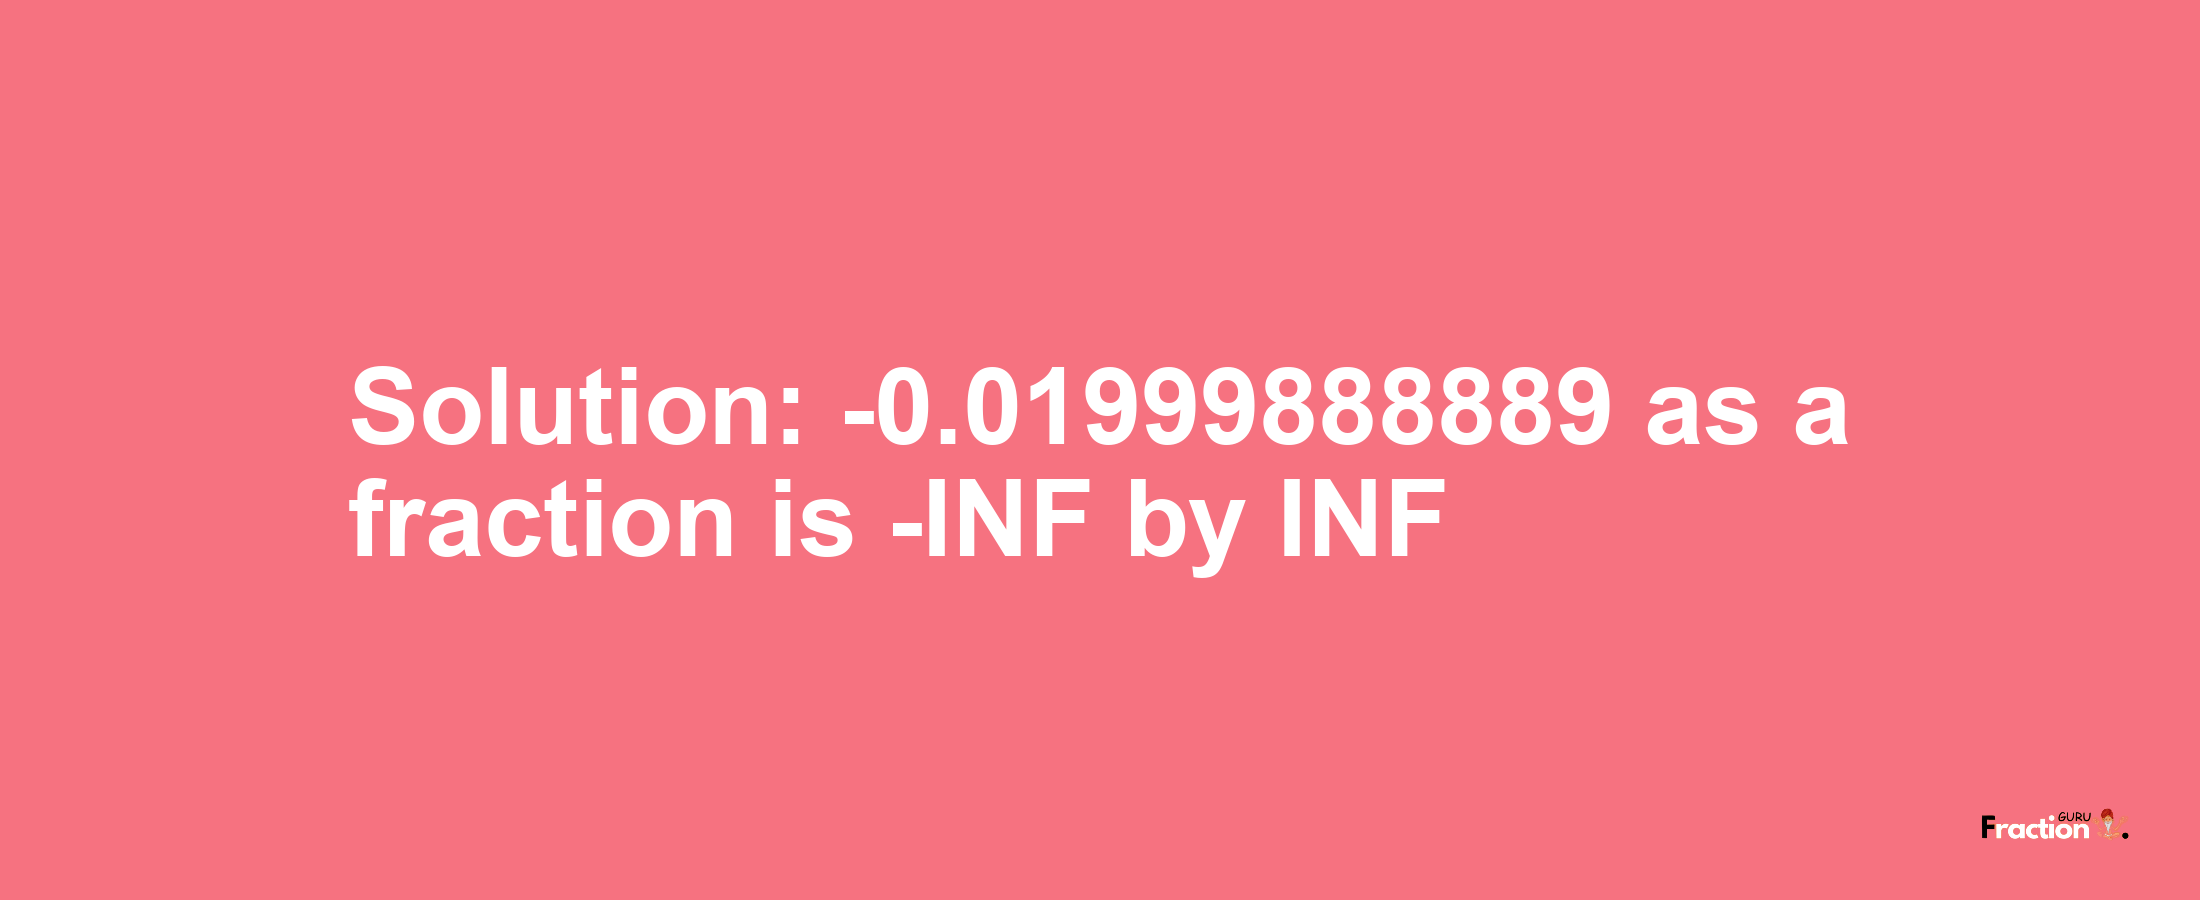 Solution:-0.01999888889 as a fraction is -INF/INF